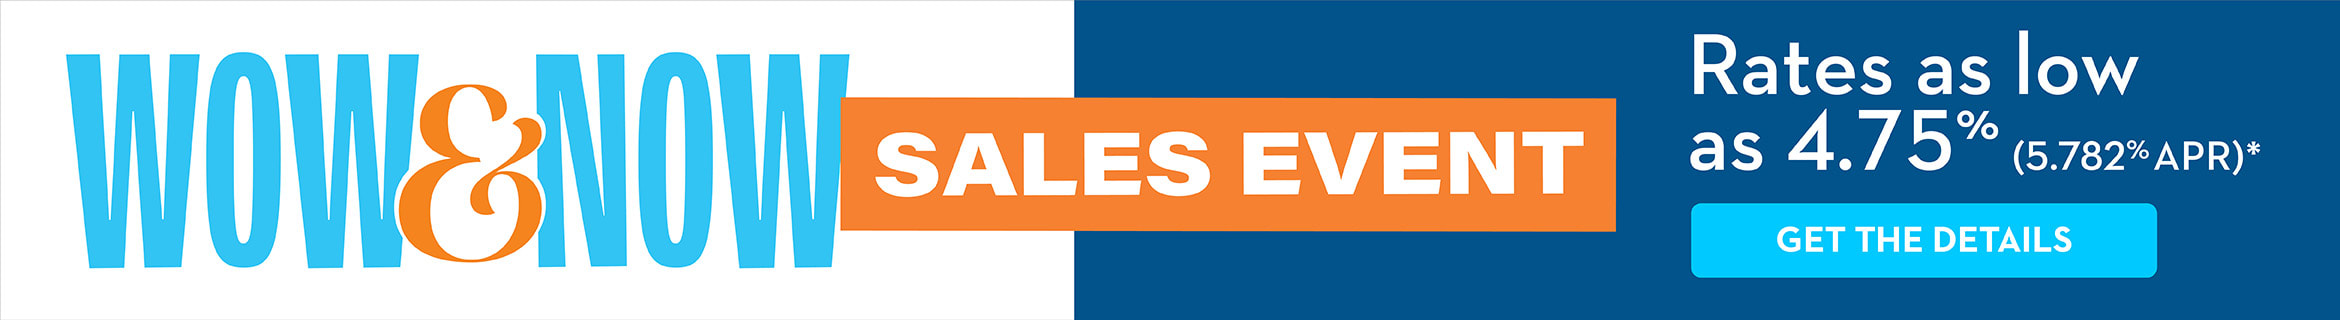 WOW & NOW SALES EVENT Rates as low as 4.75% (5.782% APR)* GET THE DETAILS